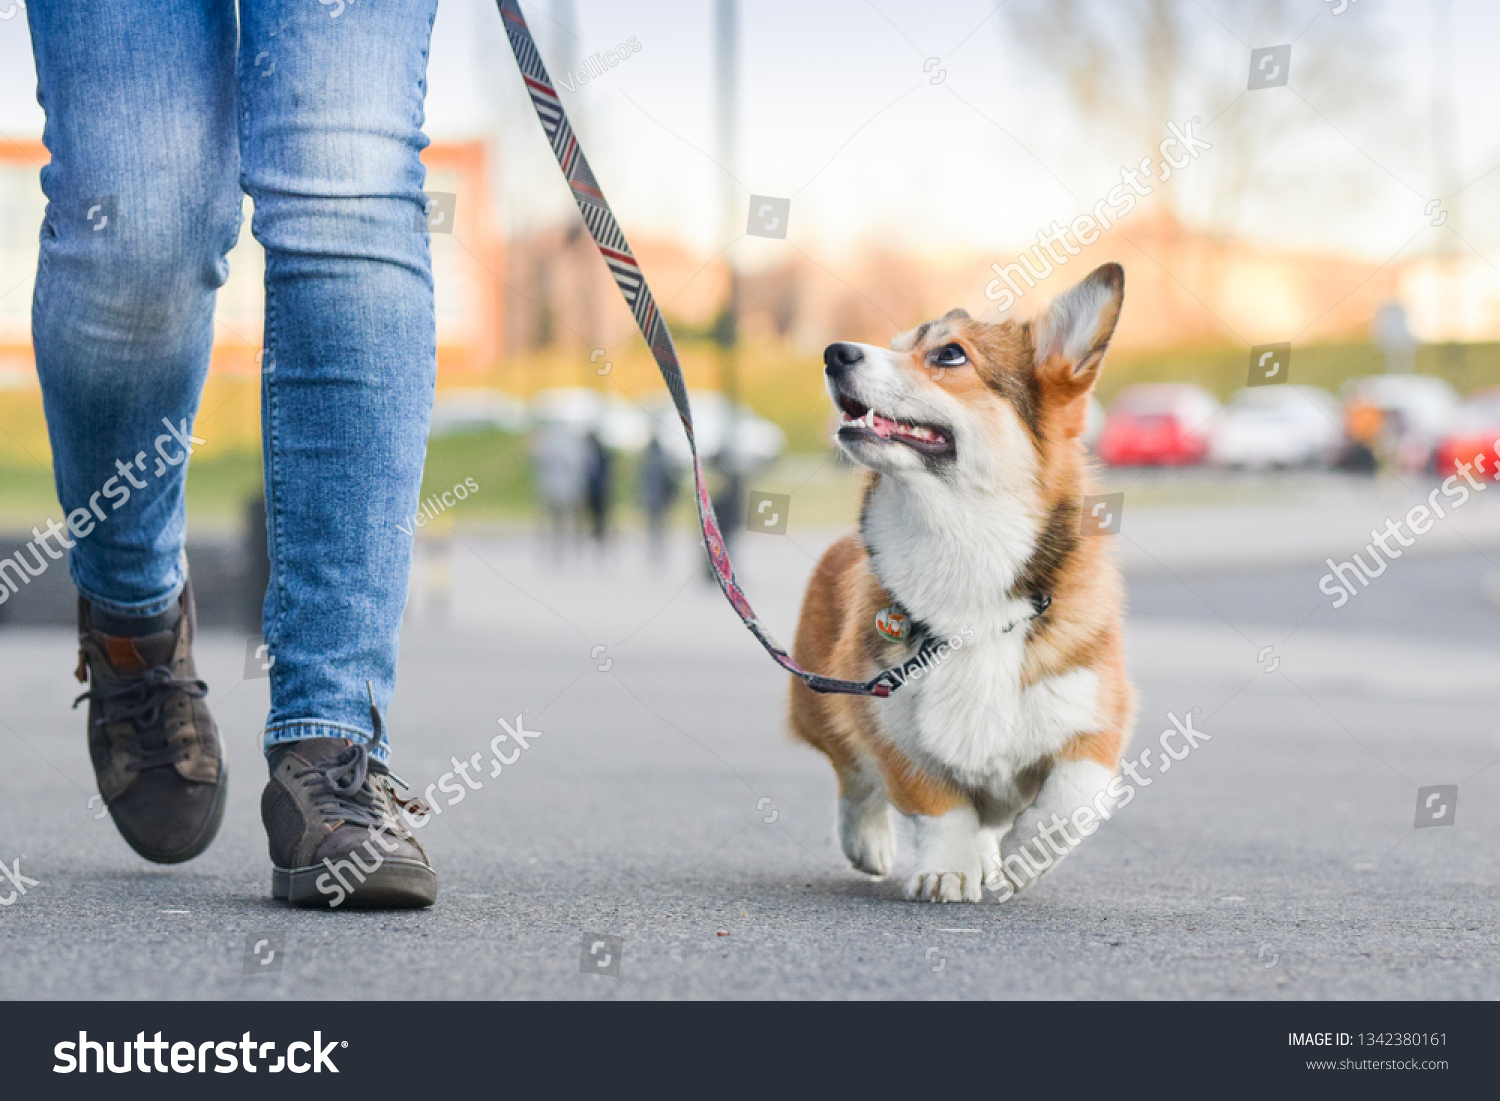 Welsh corgi pembroke dog walking nicely on a leash with an owner during a walk in the city #1342380161